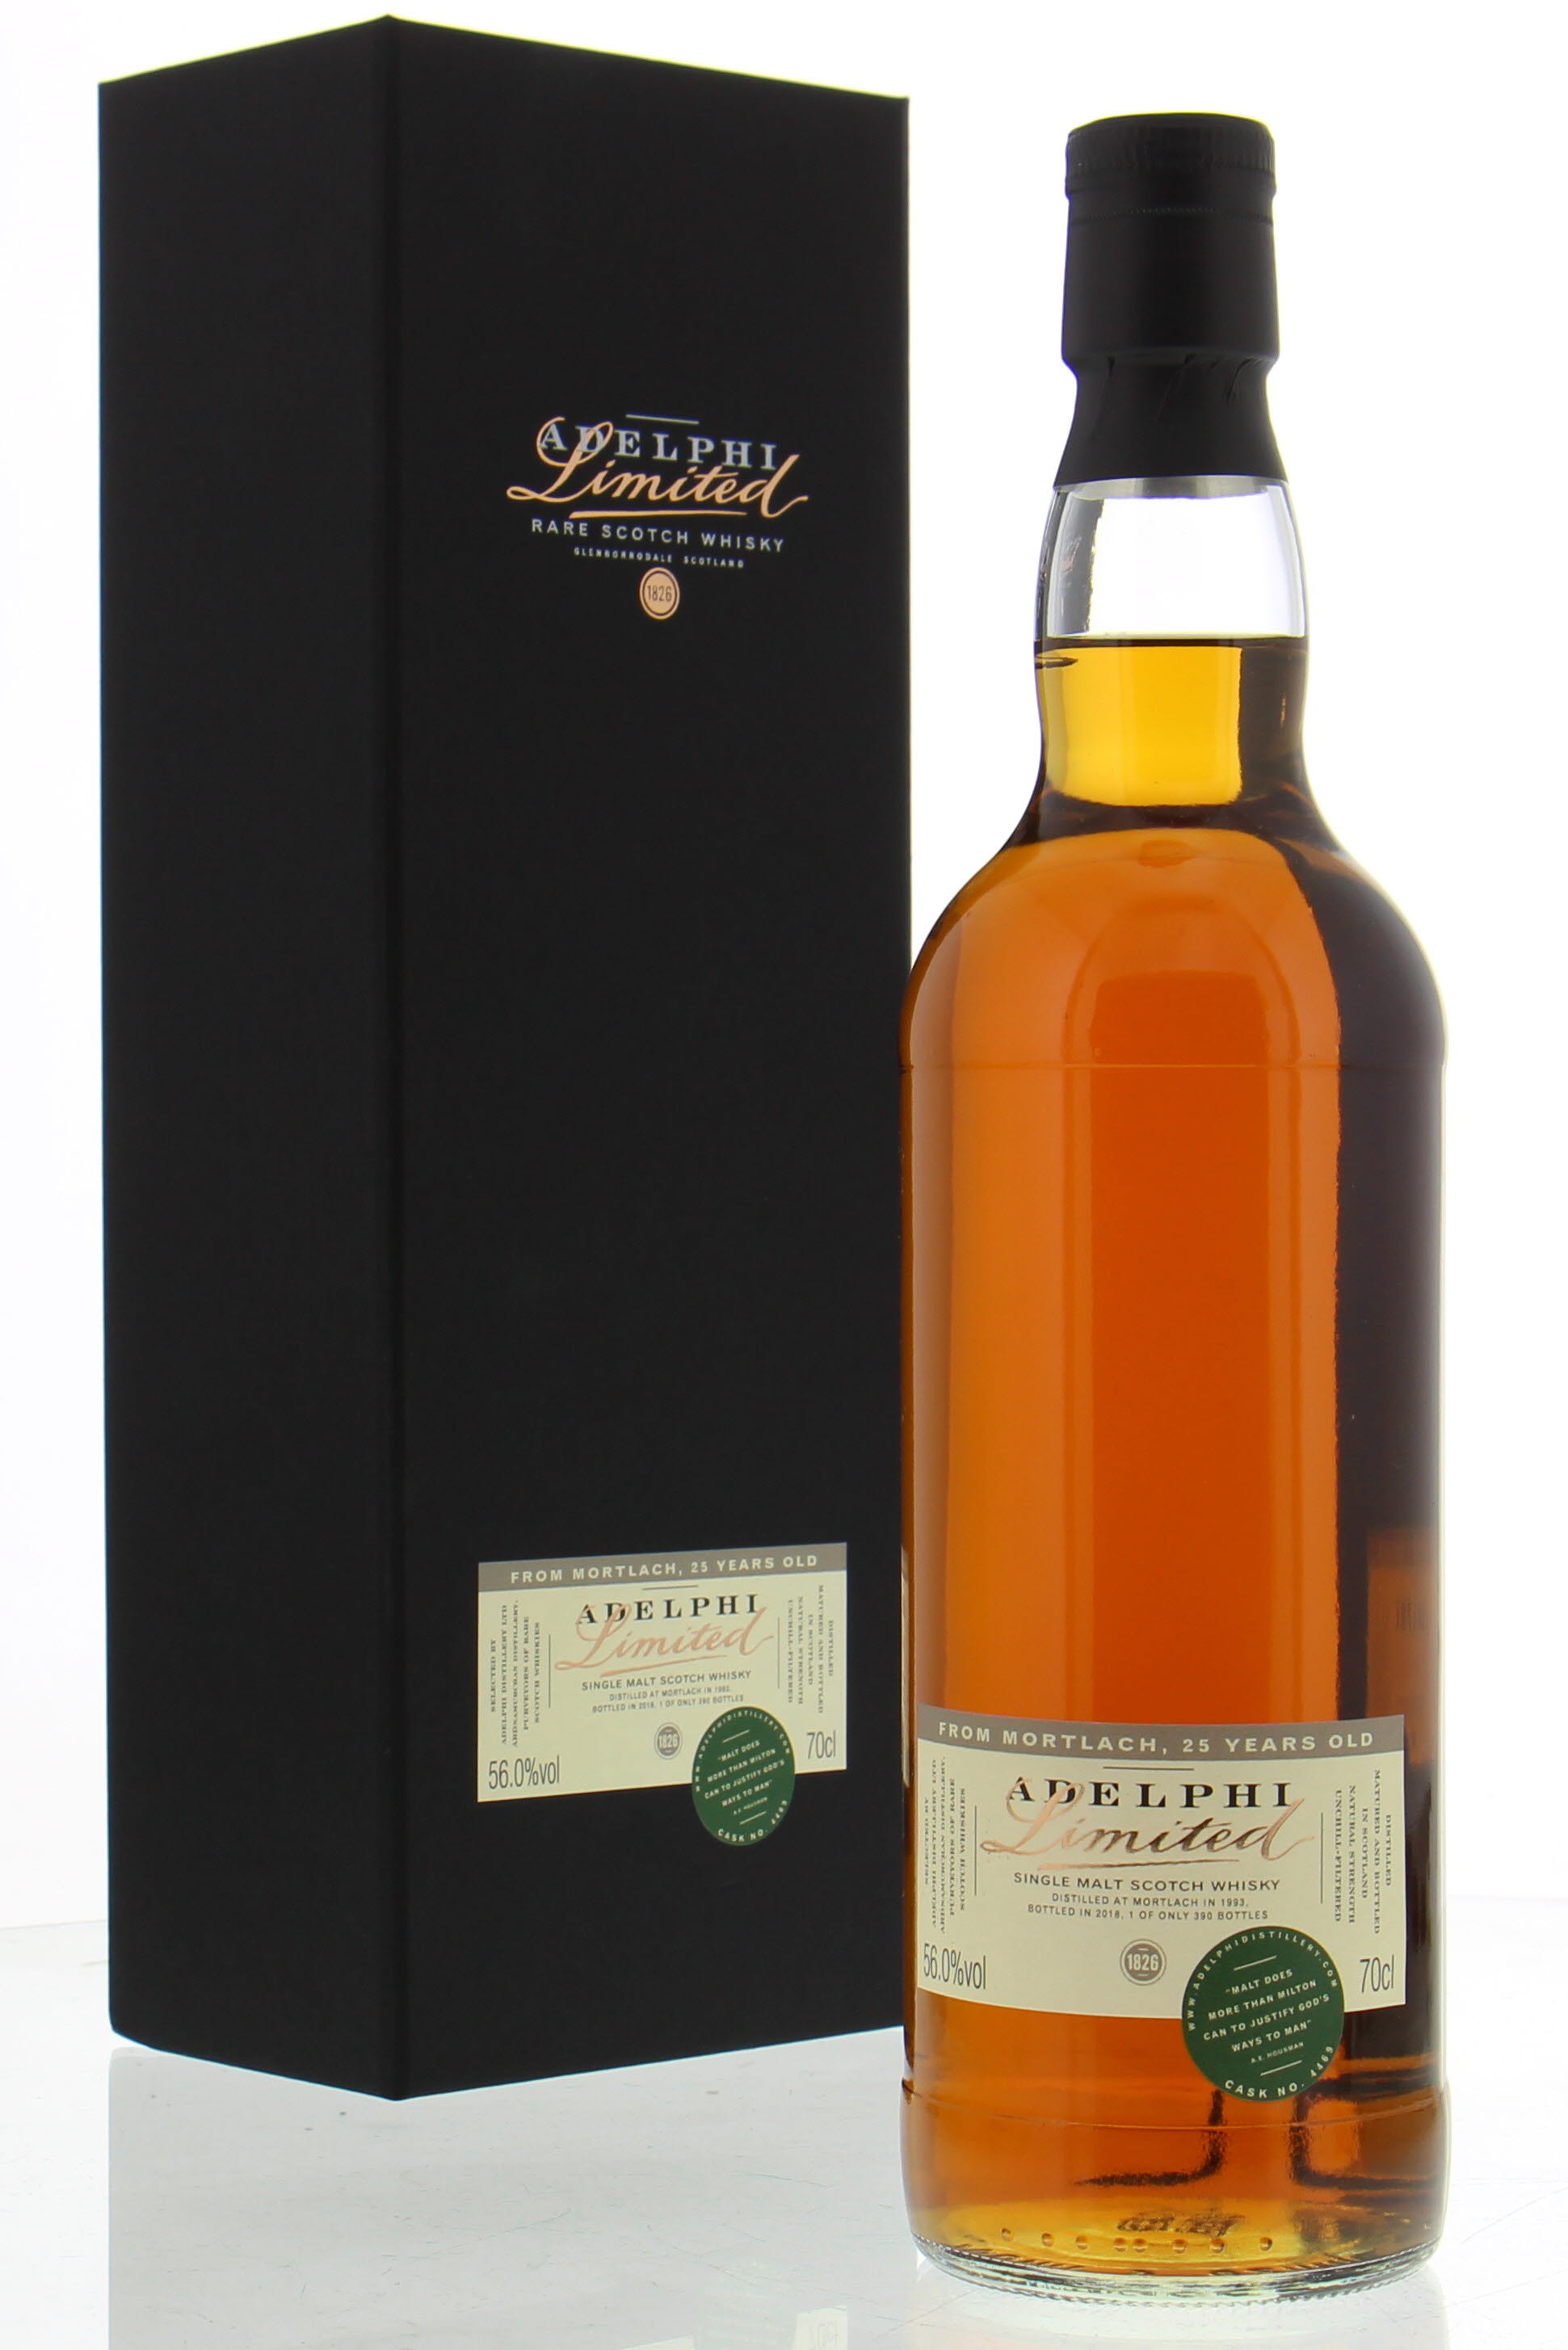 Mortlach - 25 Years Old Adelphi Cask 4469 56% 1993 In original Container